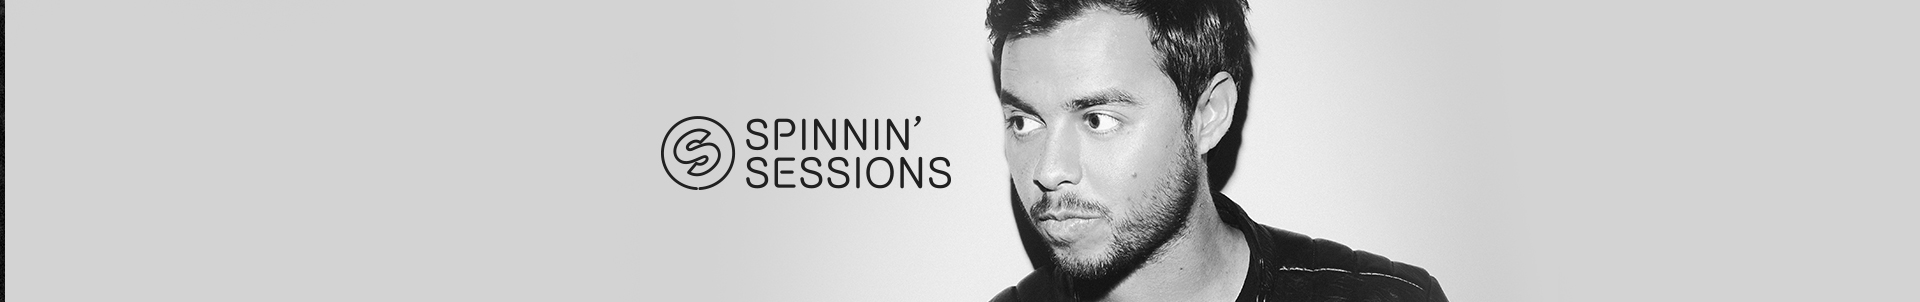 Spinnin' Sessions presents exclusive mix by Quintino